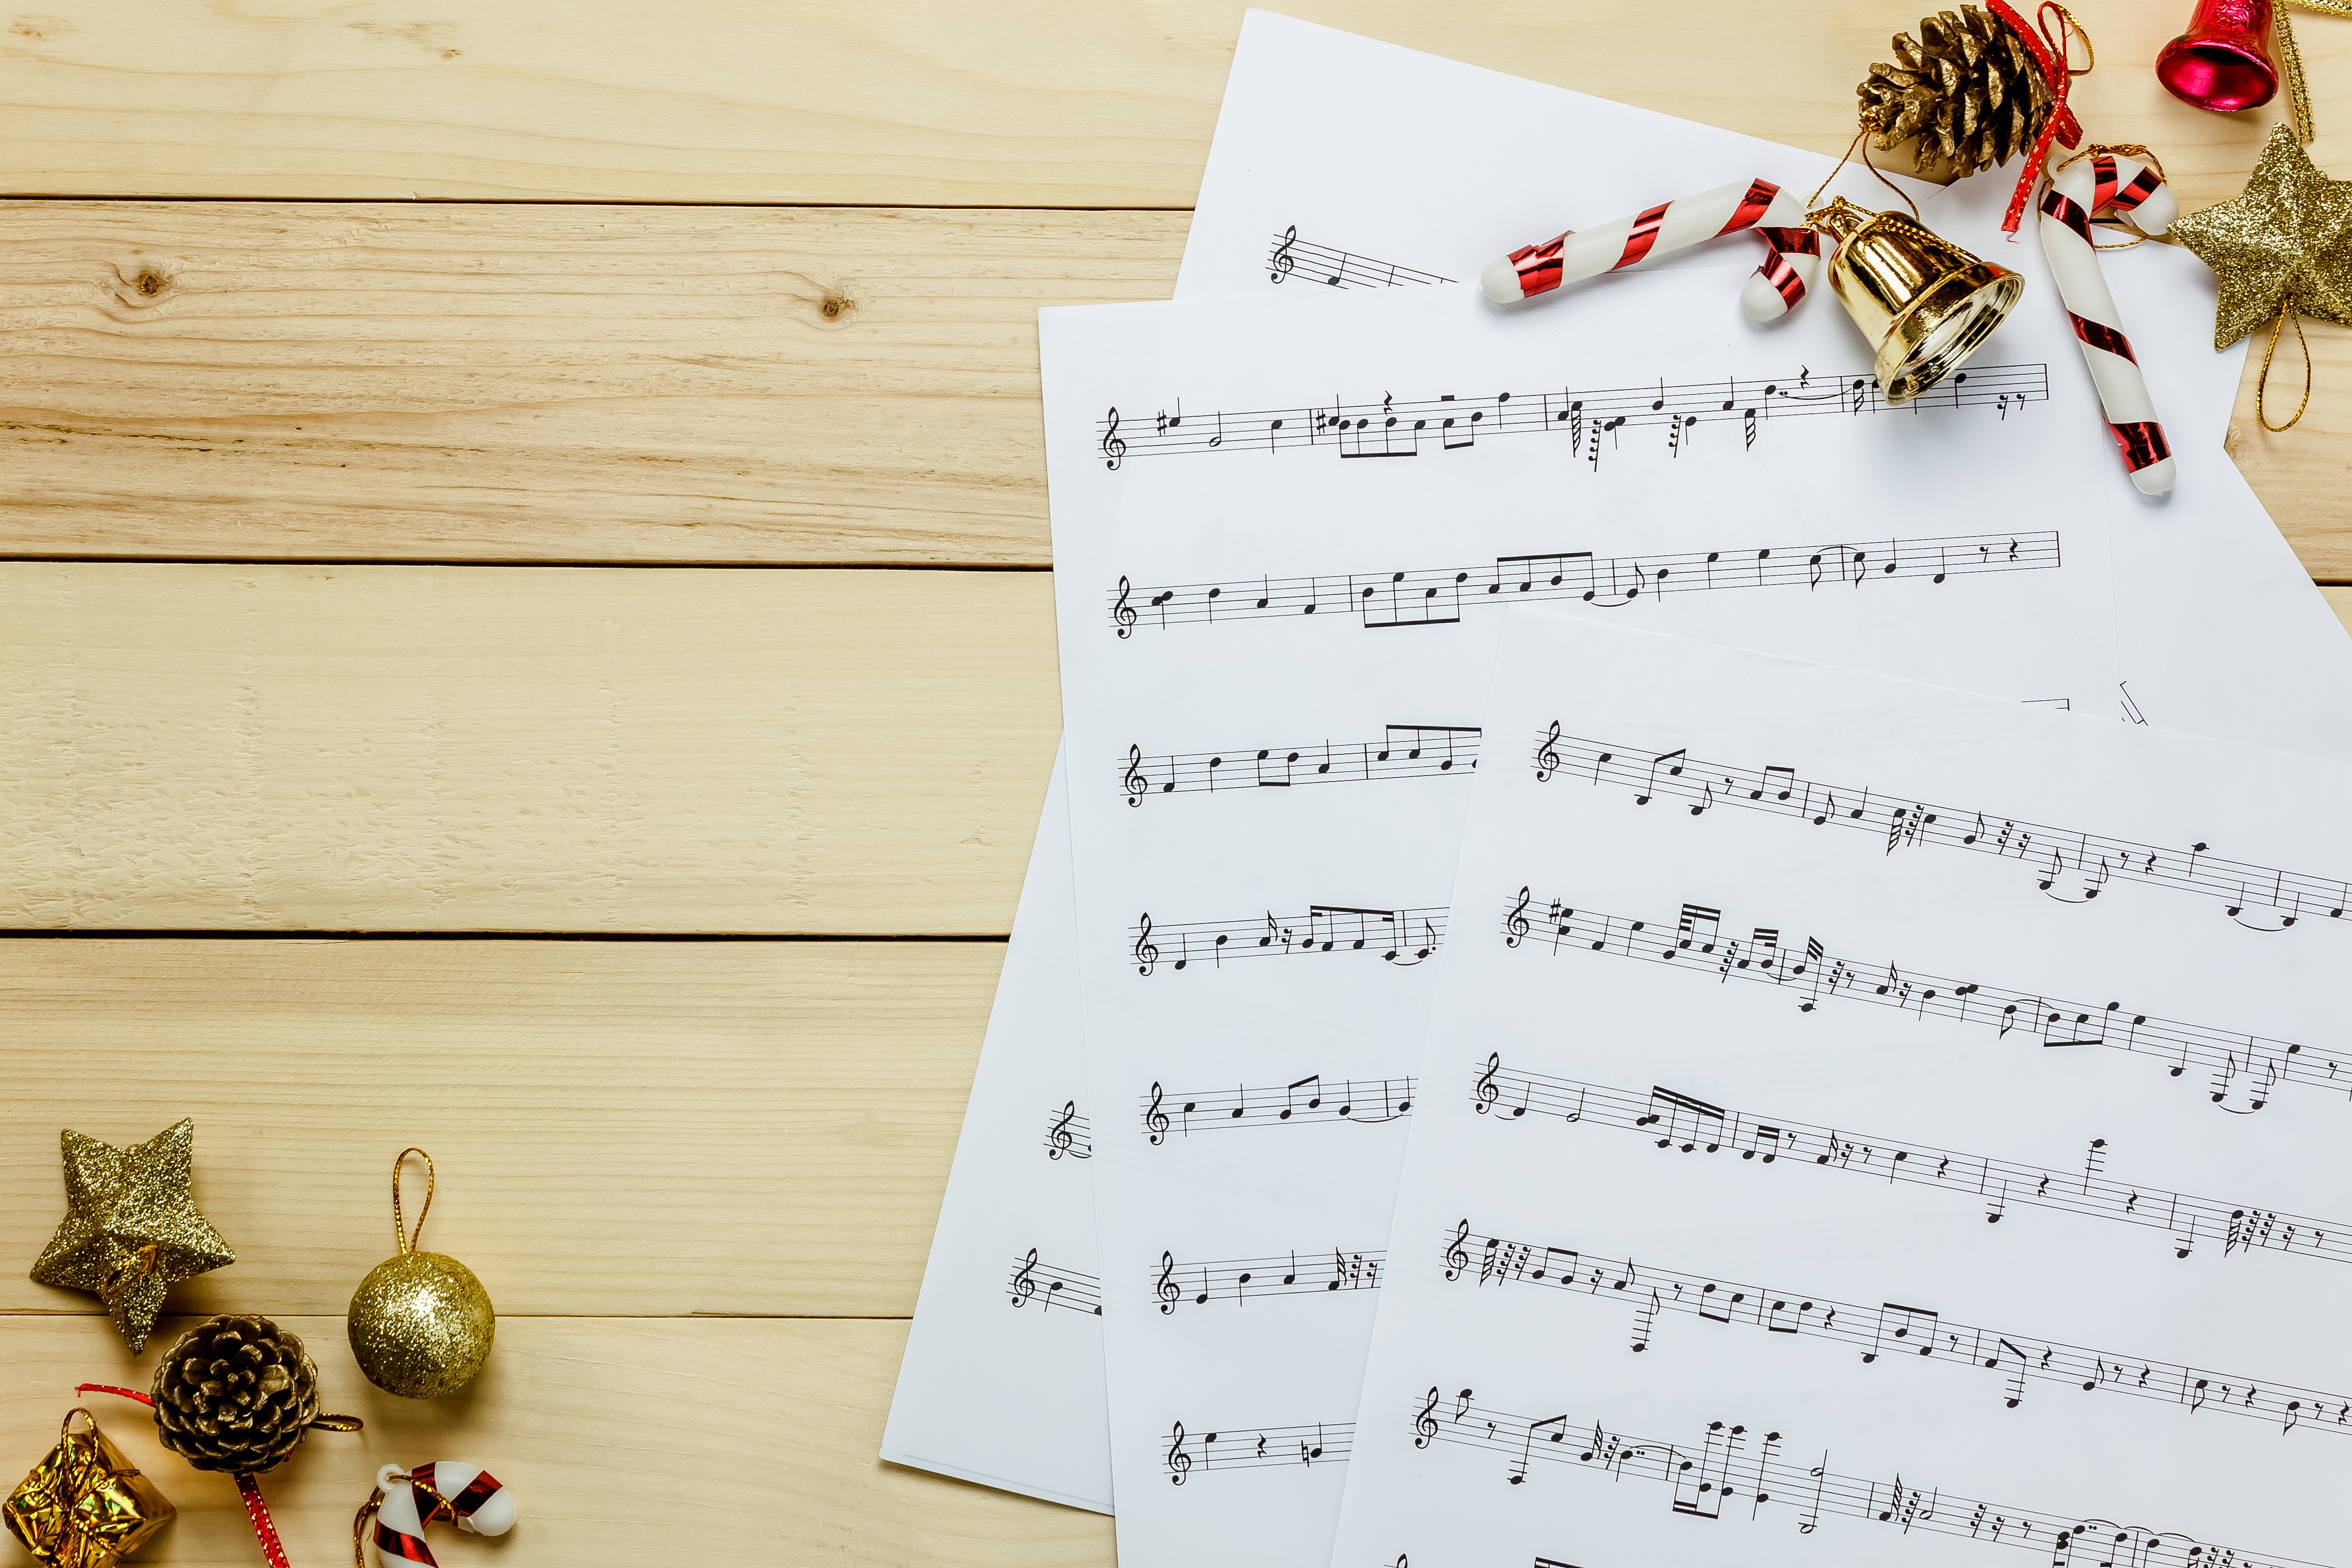 Sheet music on a wooden background with Christmas bells and ornaments around the border.